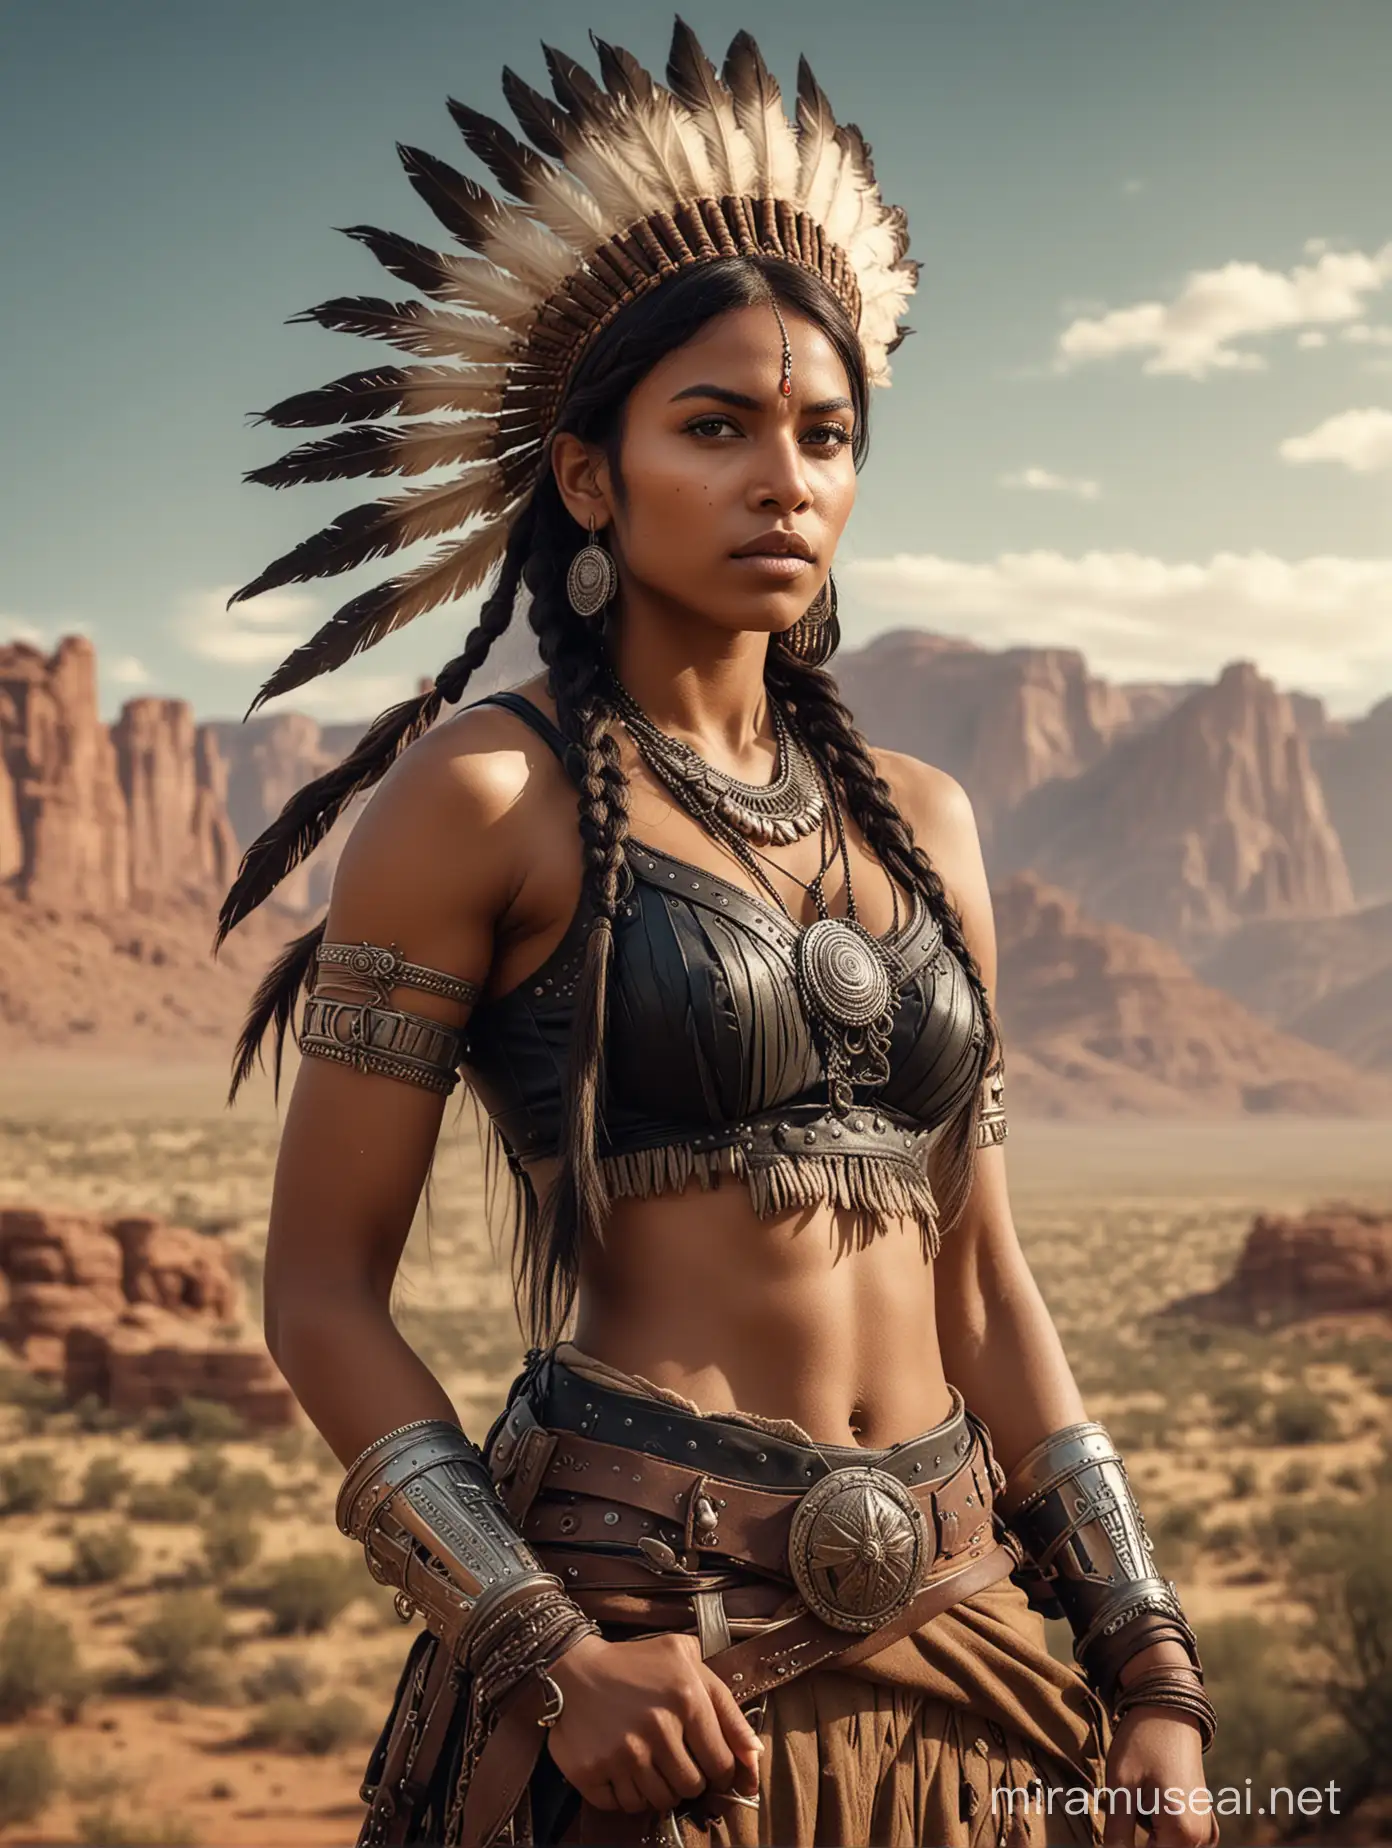 Stunning Black Indian Woman Warrior in 1800s Style with Apache Headdress and Gun